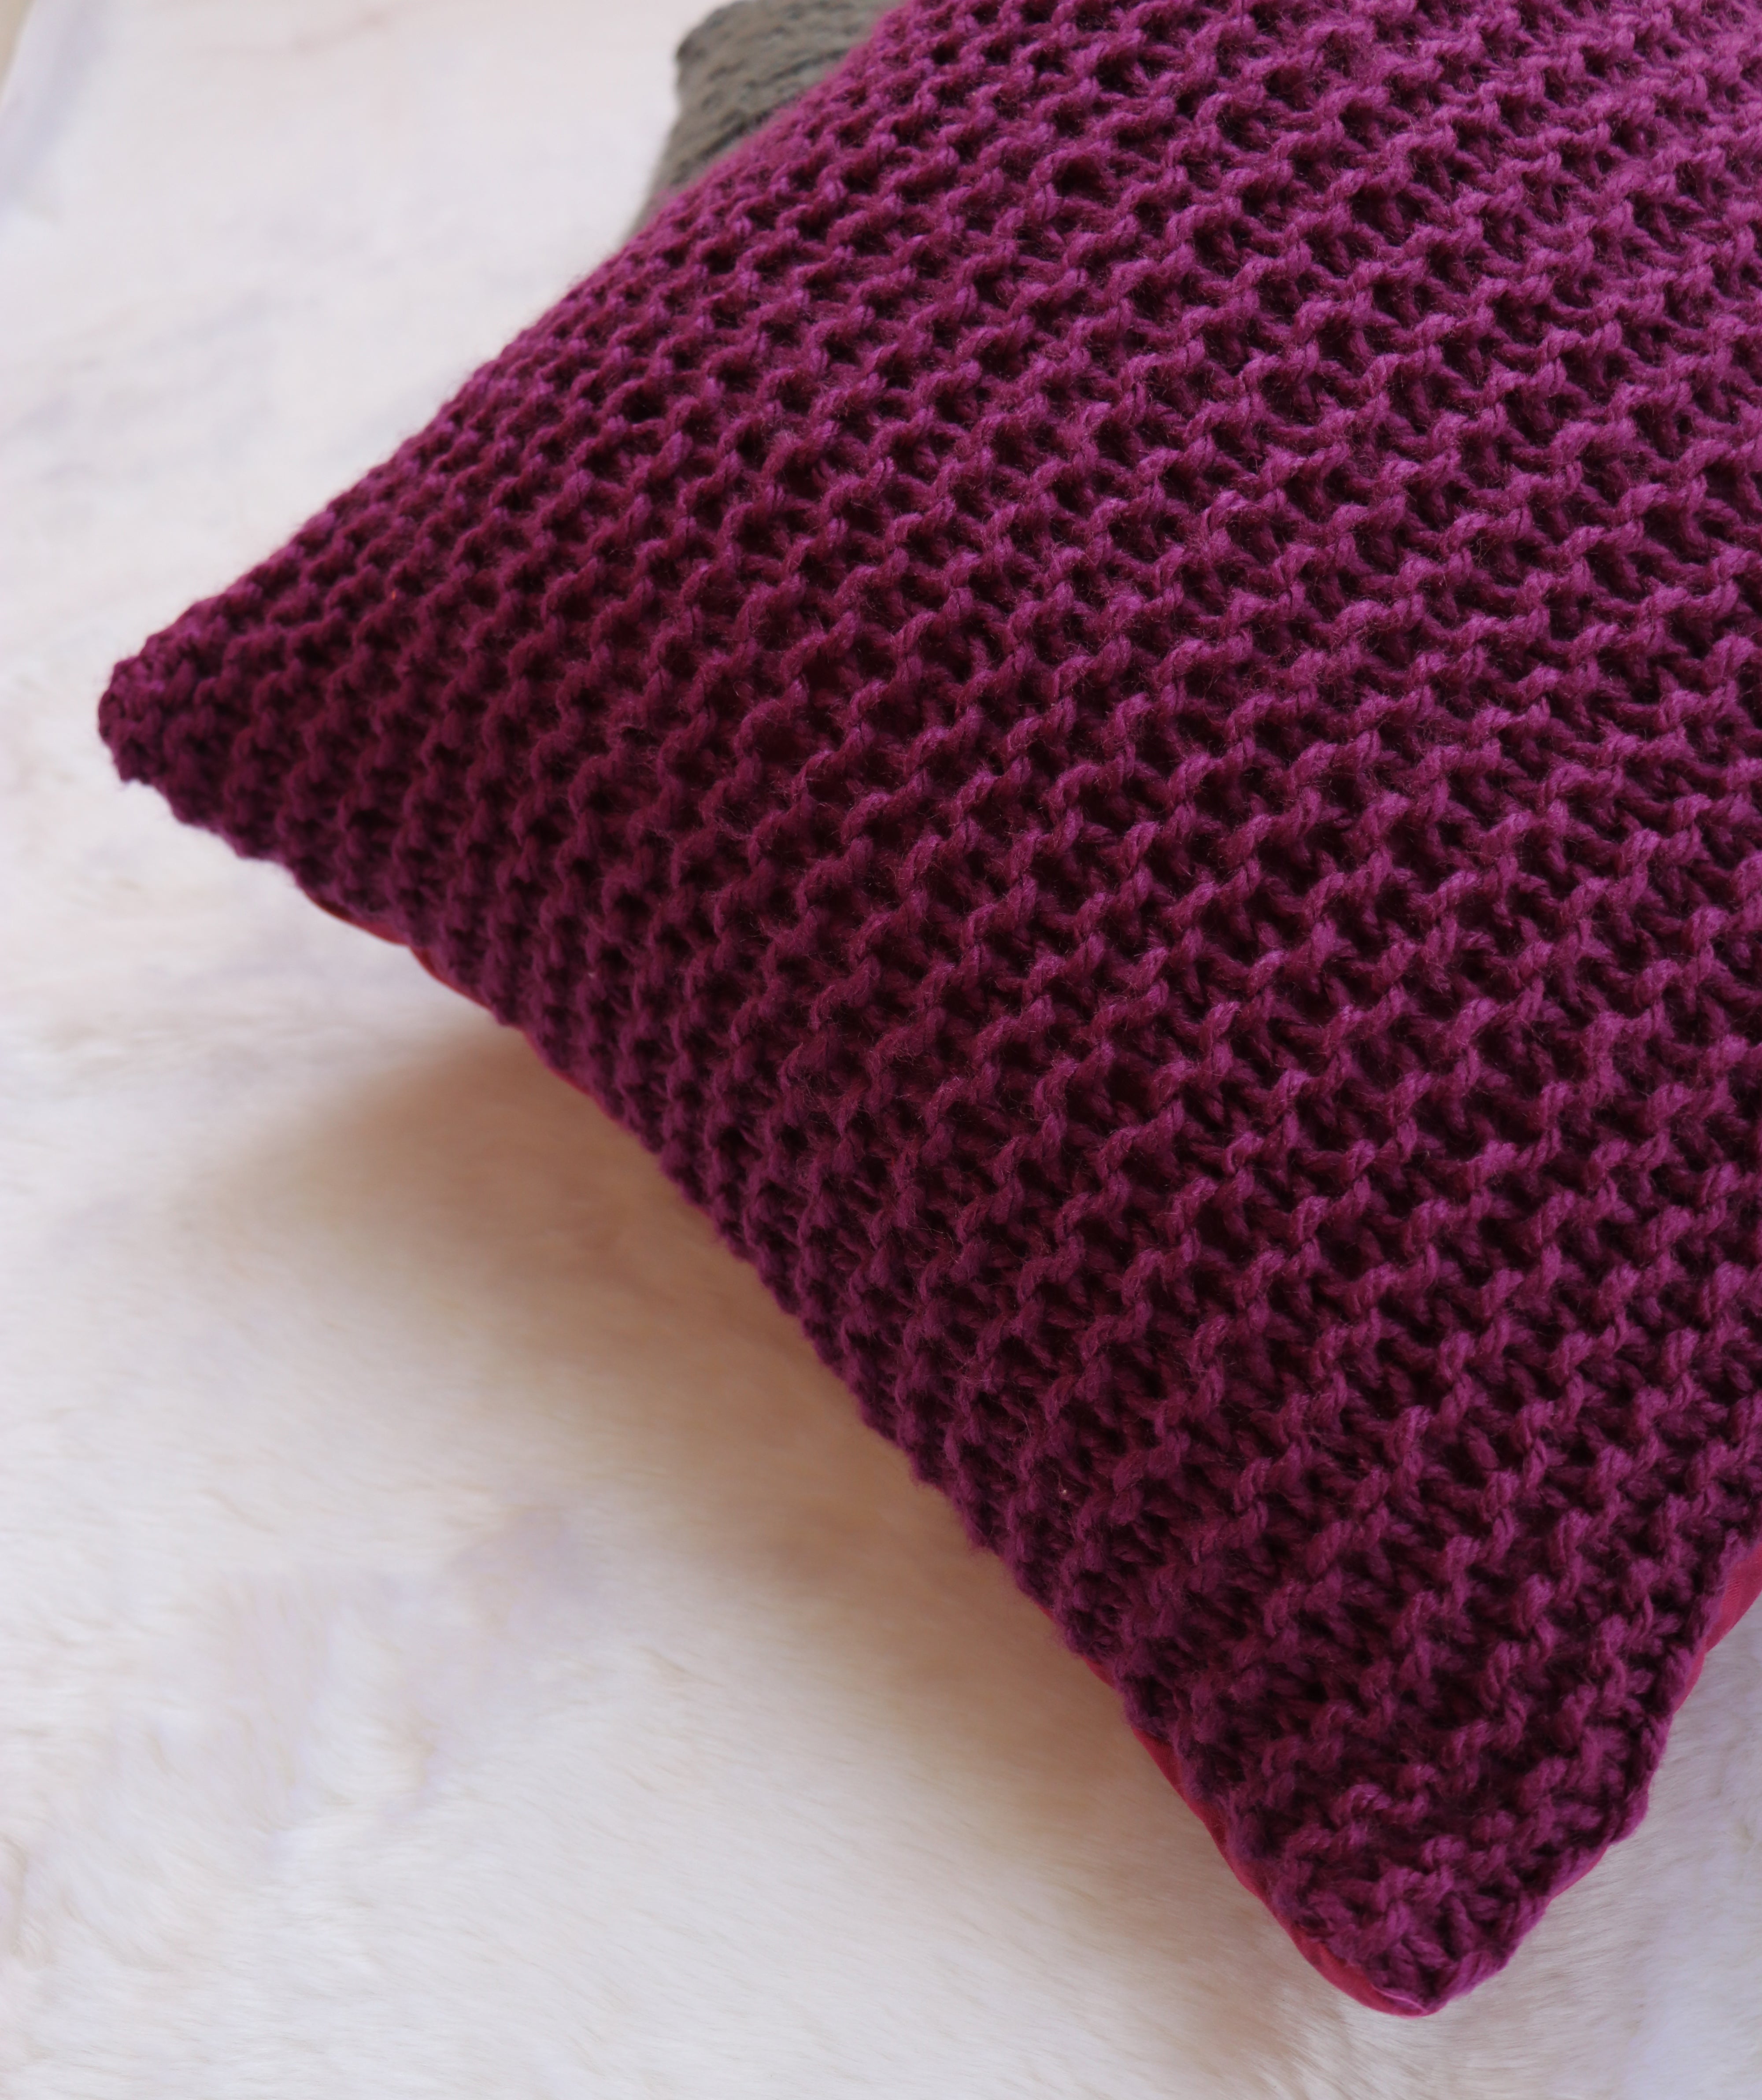 Purple hand knitted cushions by artisans of India for winter season